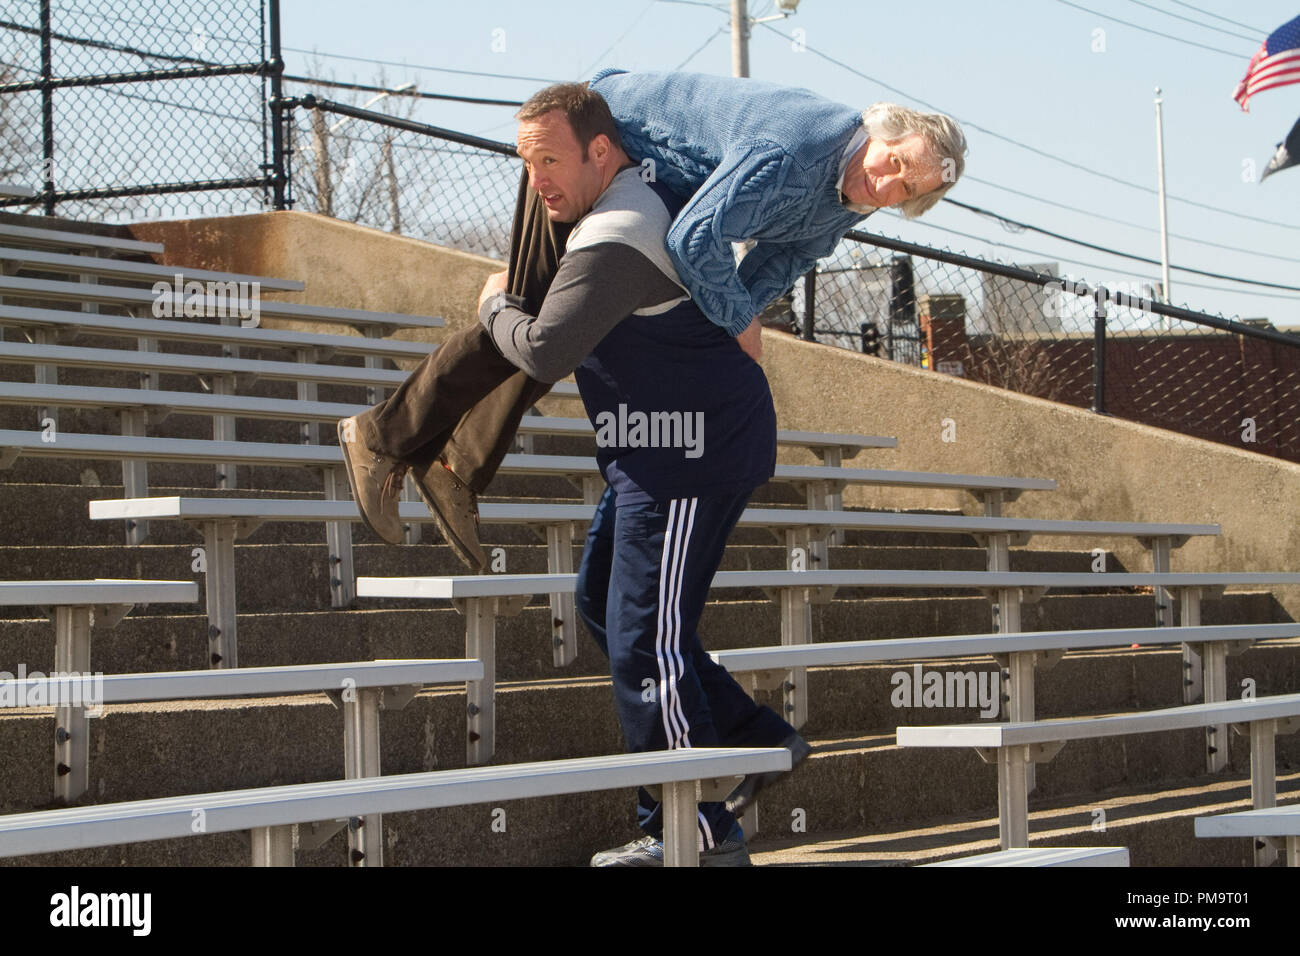 Scott Voss (Kevin James) carries Marty (Henry Winkler) over his shoulder as added weight while he works out climbing the bleacher stairs in Columbia Pictures' HERE COMES THE BOOM. Stock Photo